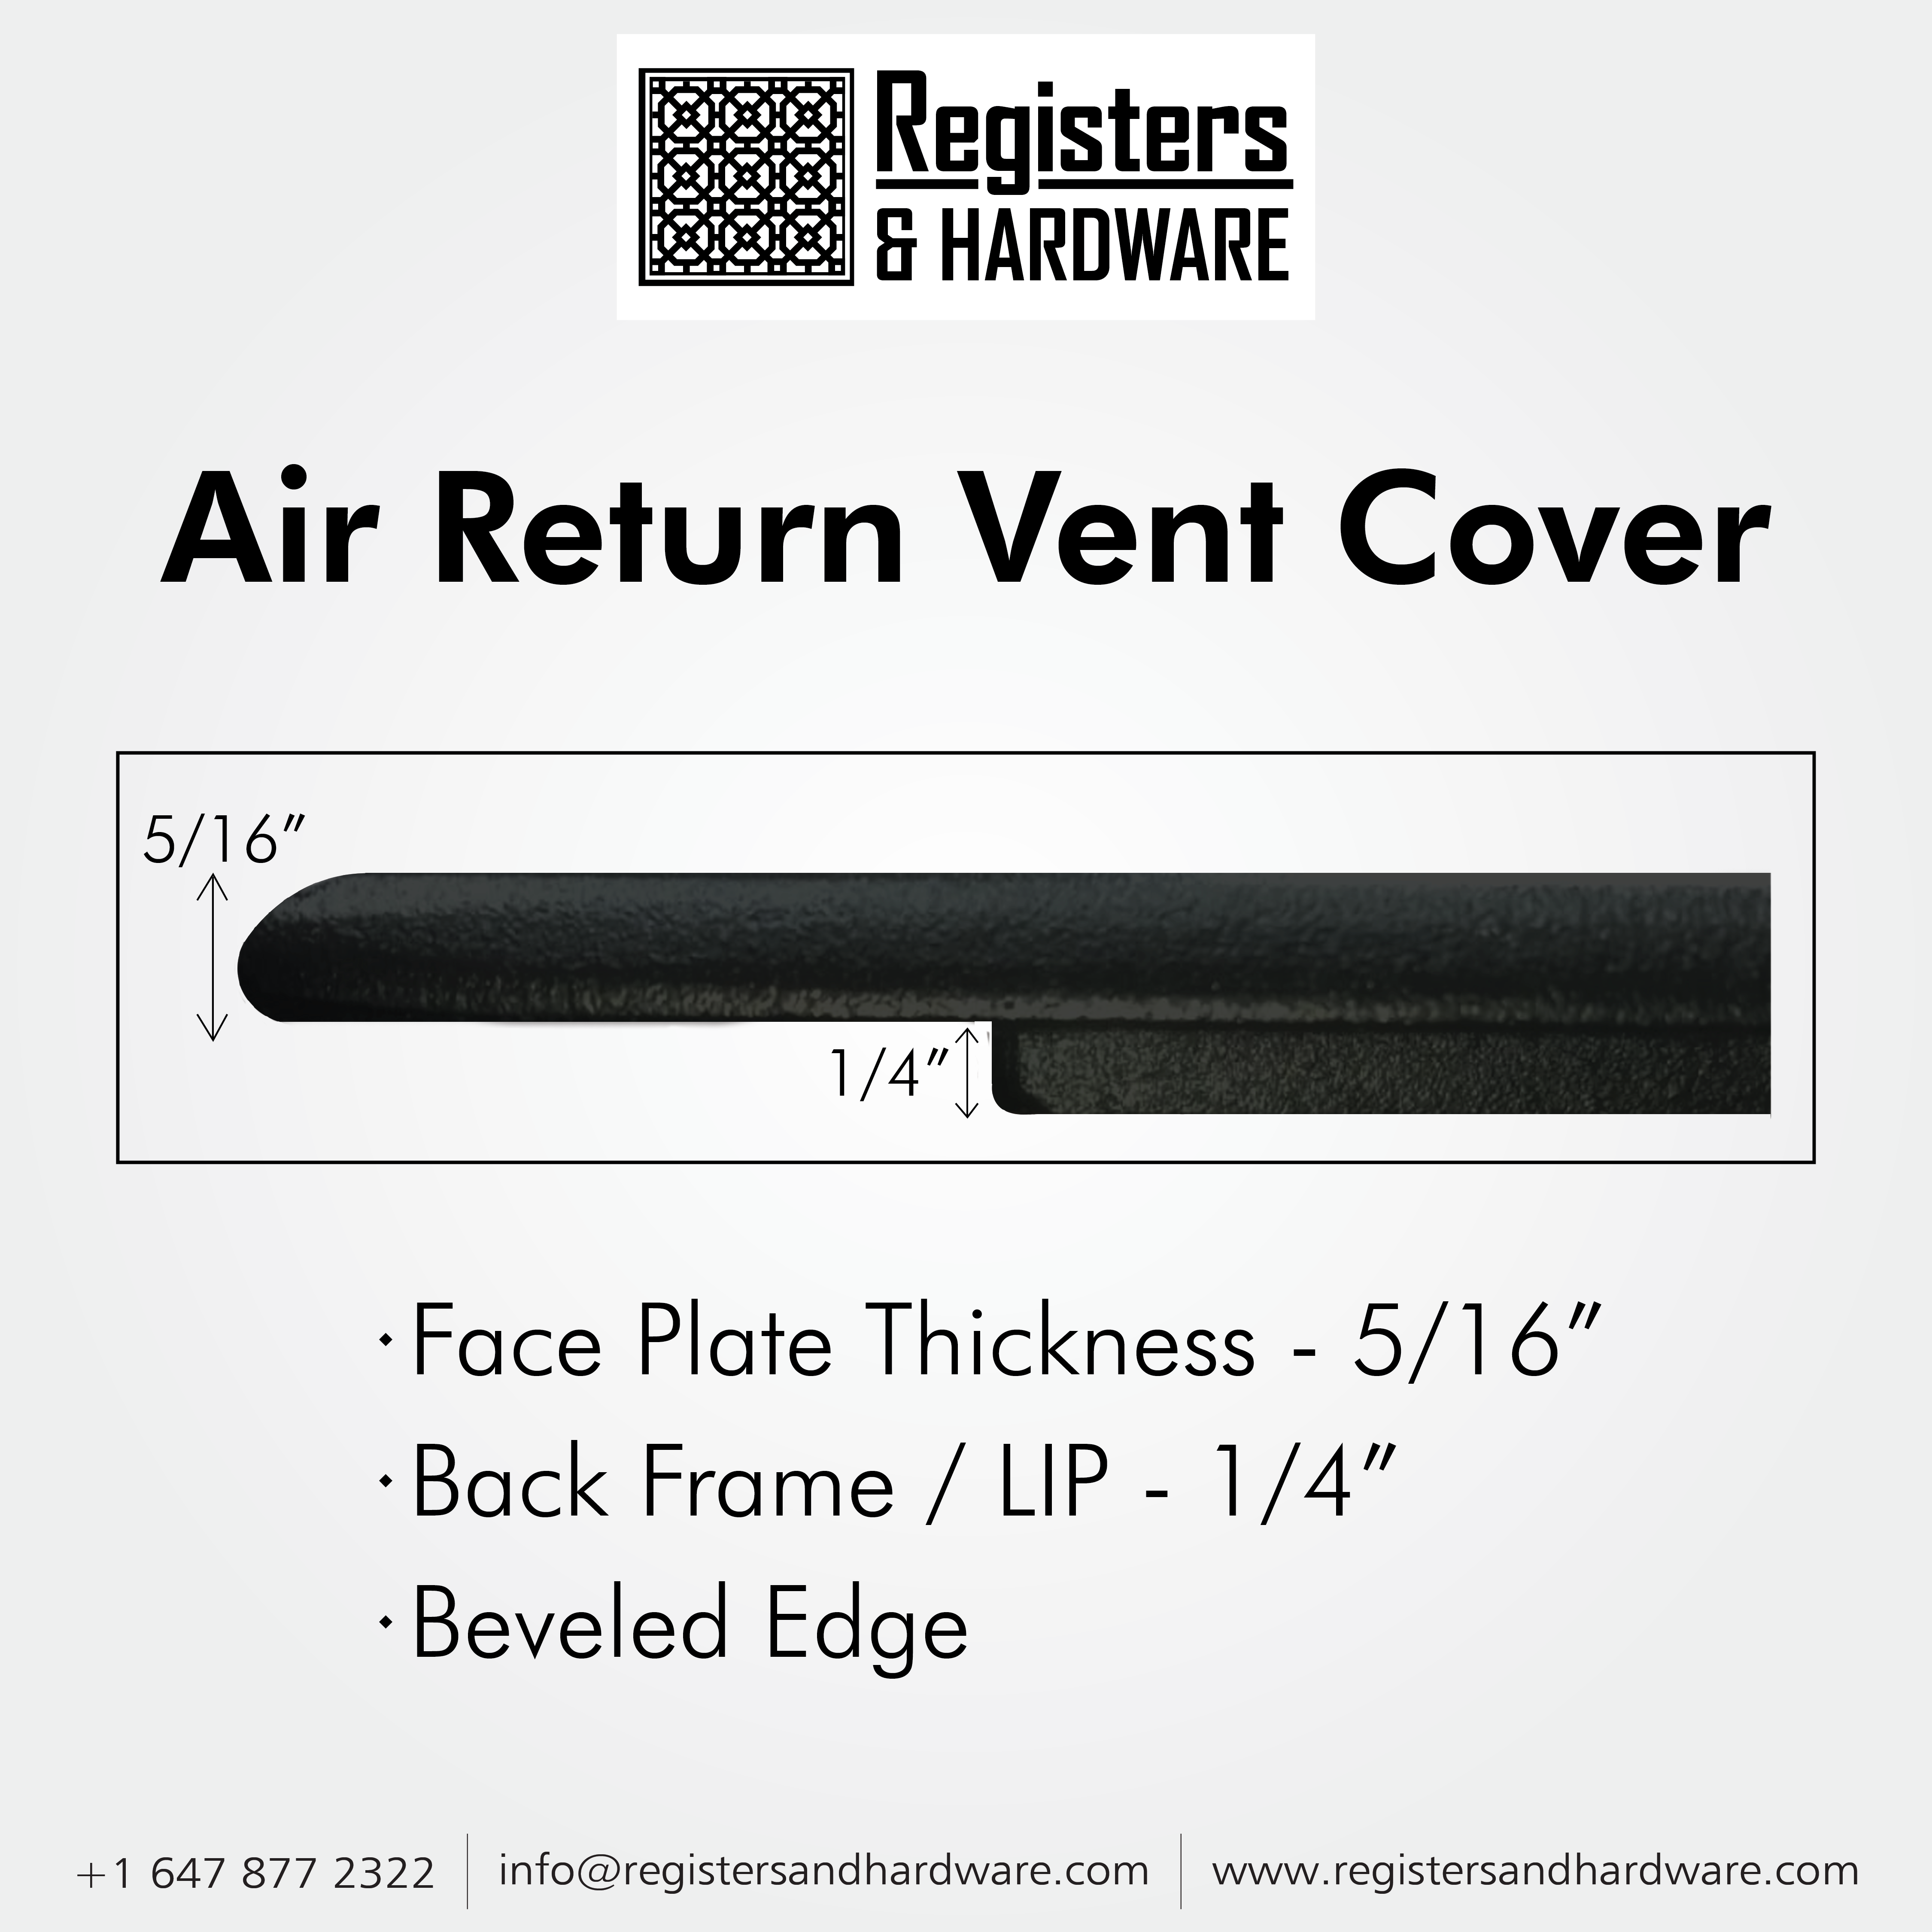 Achtek AIR RETURN 12"x14" Duct Opening (Overall Size 14"x16") | Heavy Cast Aluminum Air Grille HVAC Duct || Powder Coated